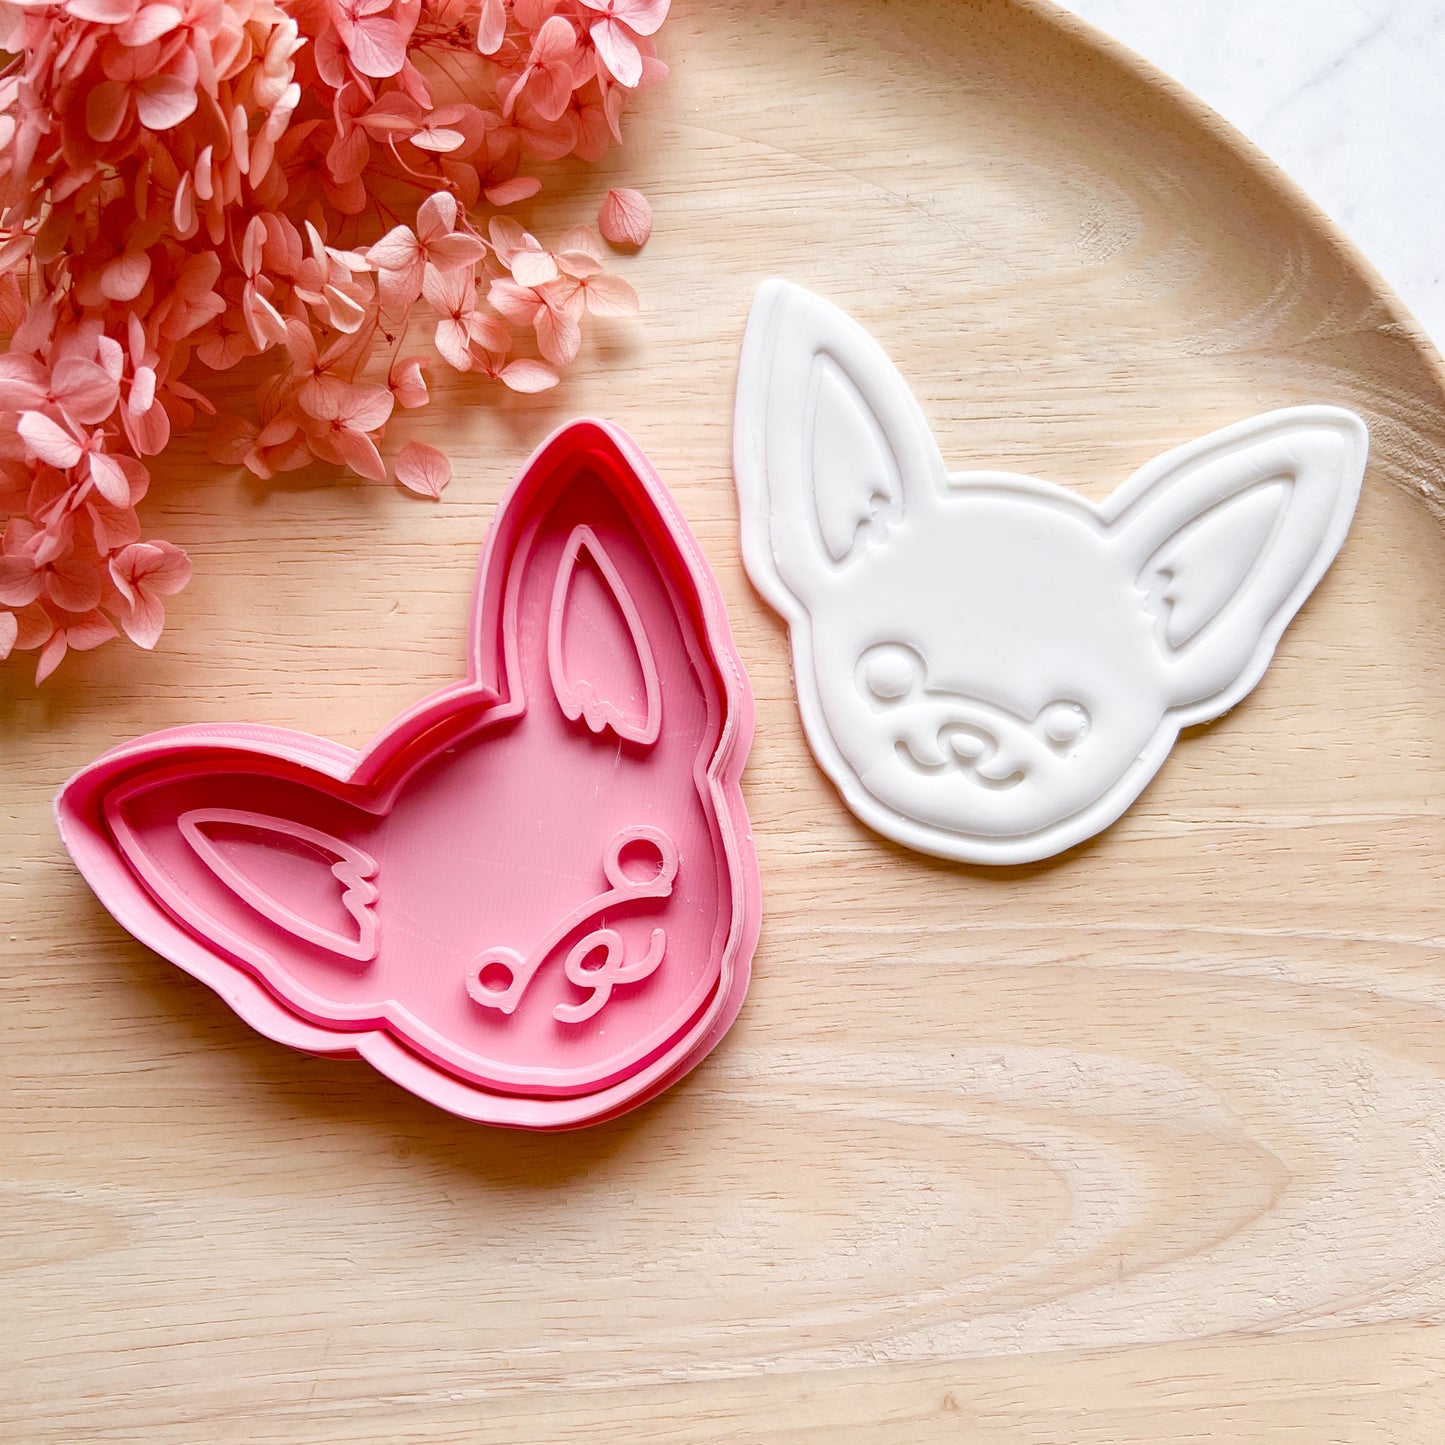 Chiwauwa Cookie Cutter & Stamp